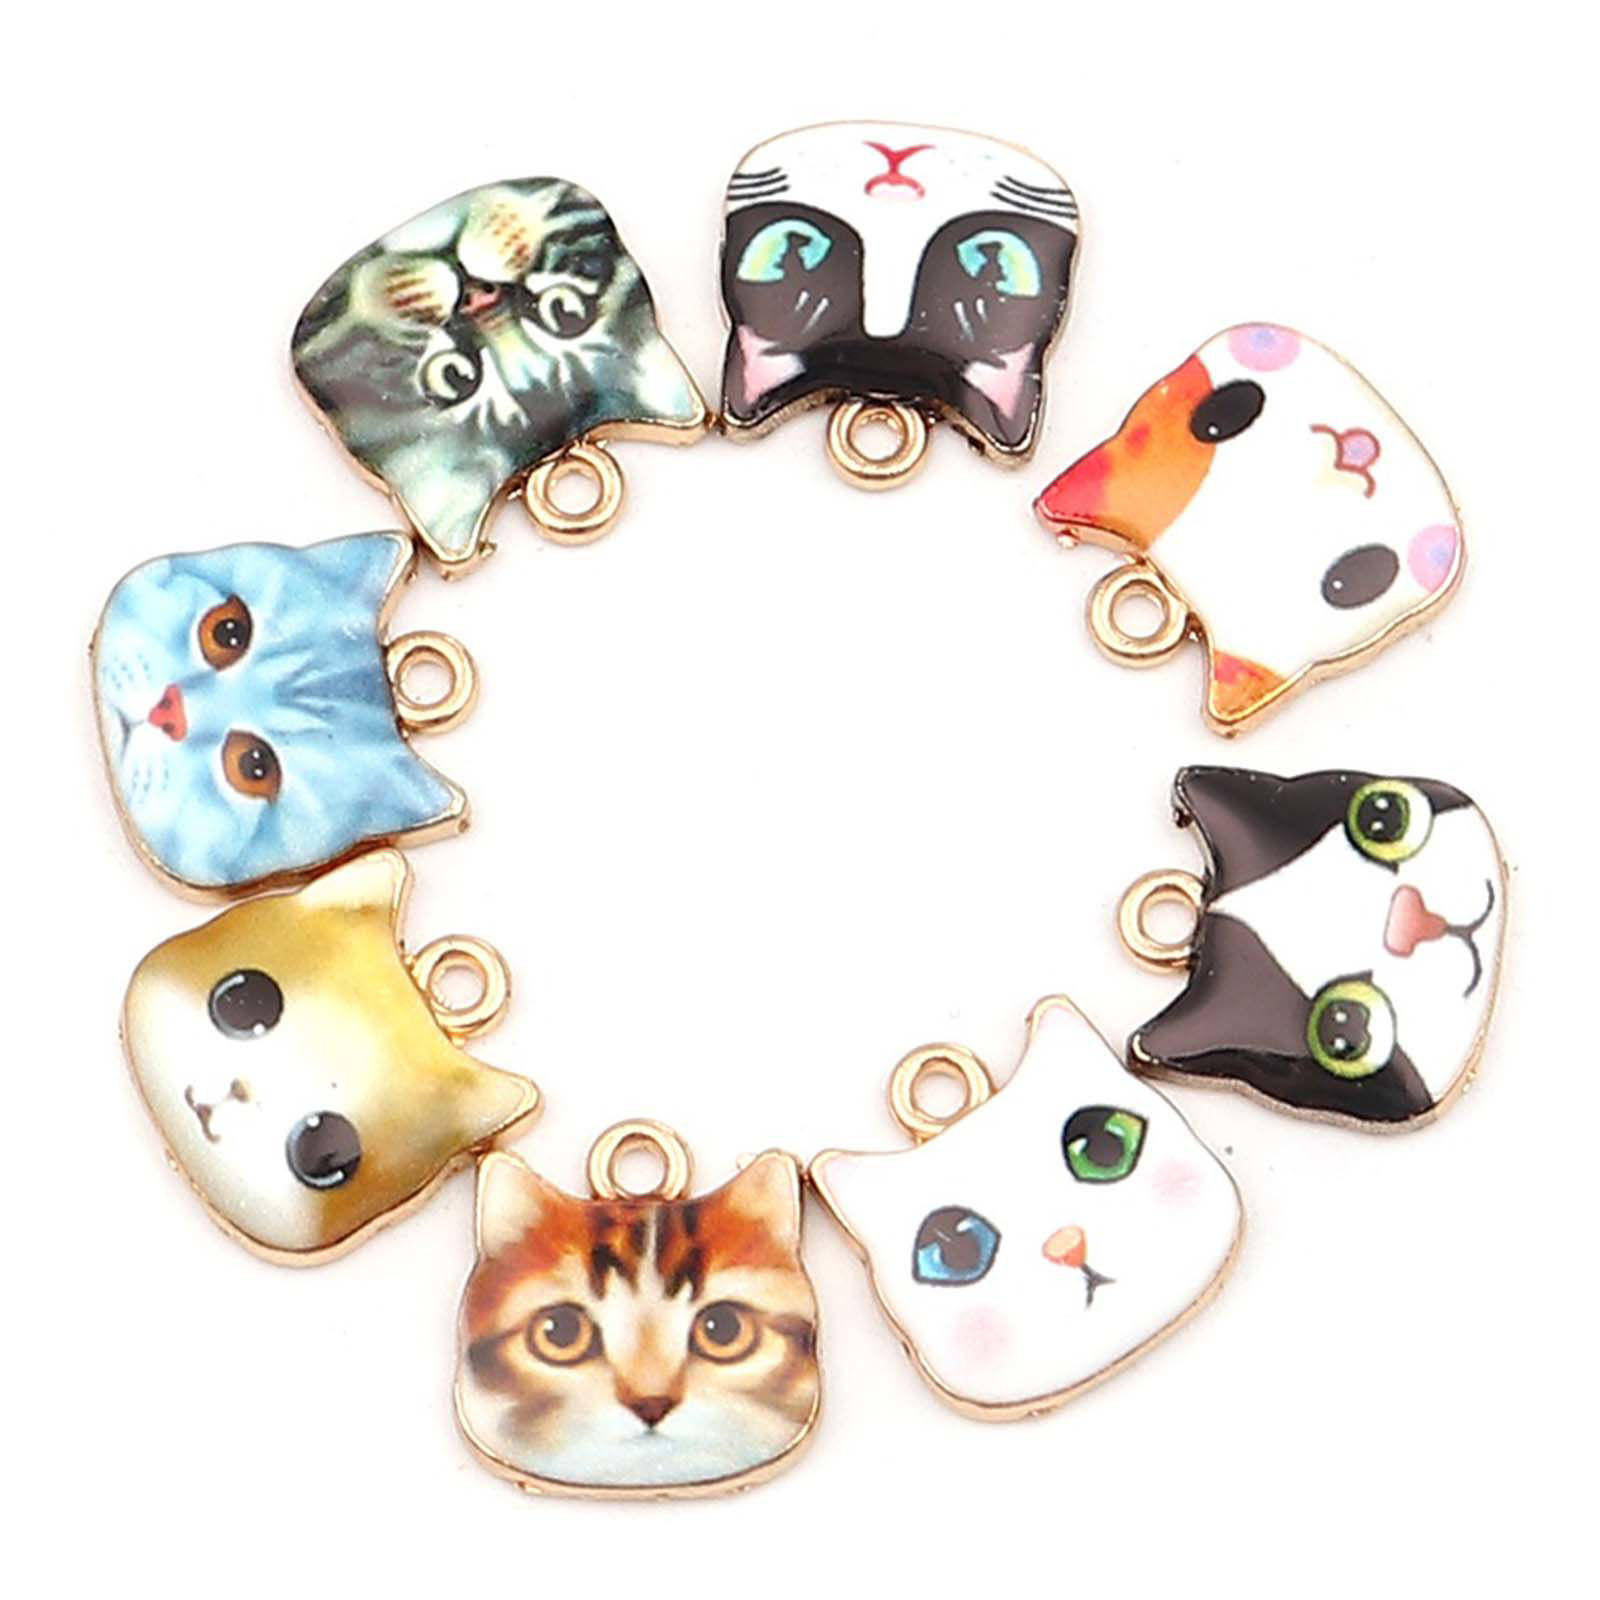 Picture of Zinc Based Alloy Charms Cat Animal Gold Plated Black & White 13mm( 4/8") x 13mm( 4/8"), 10 PCs